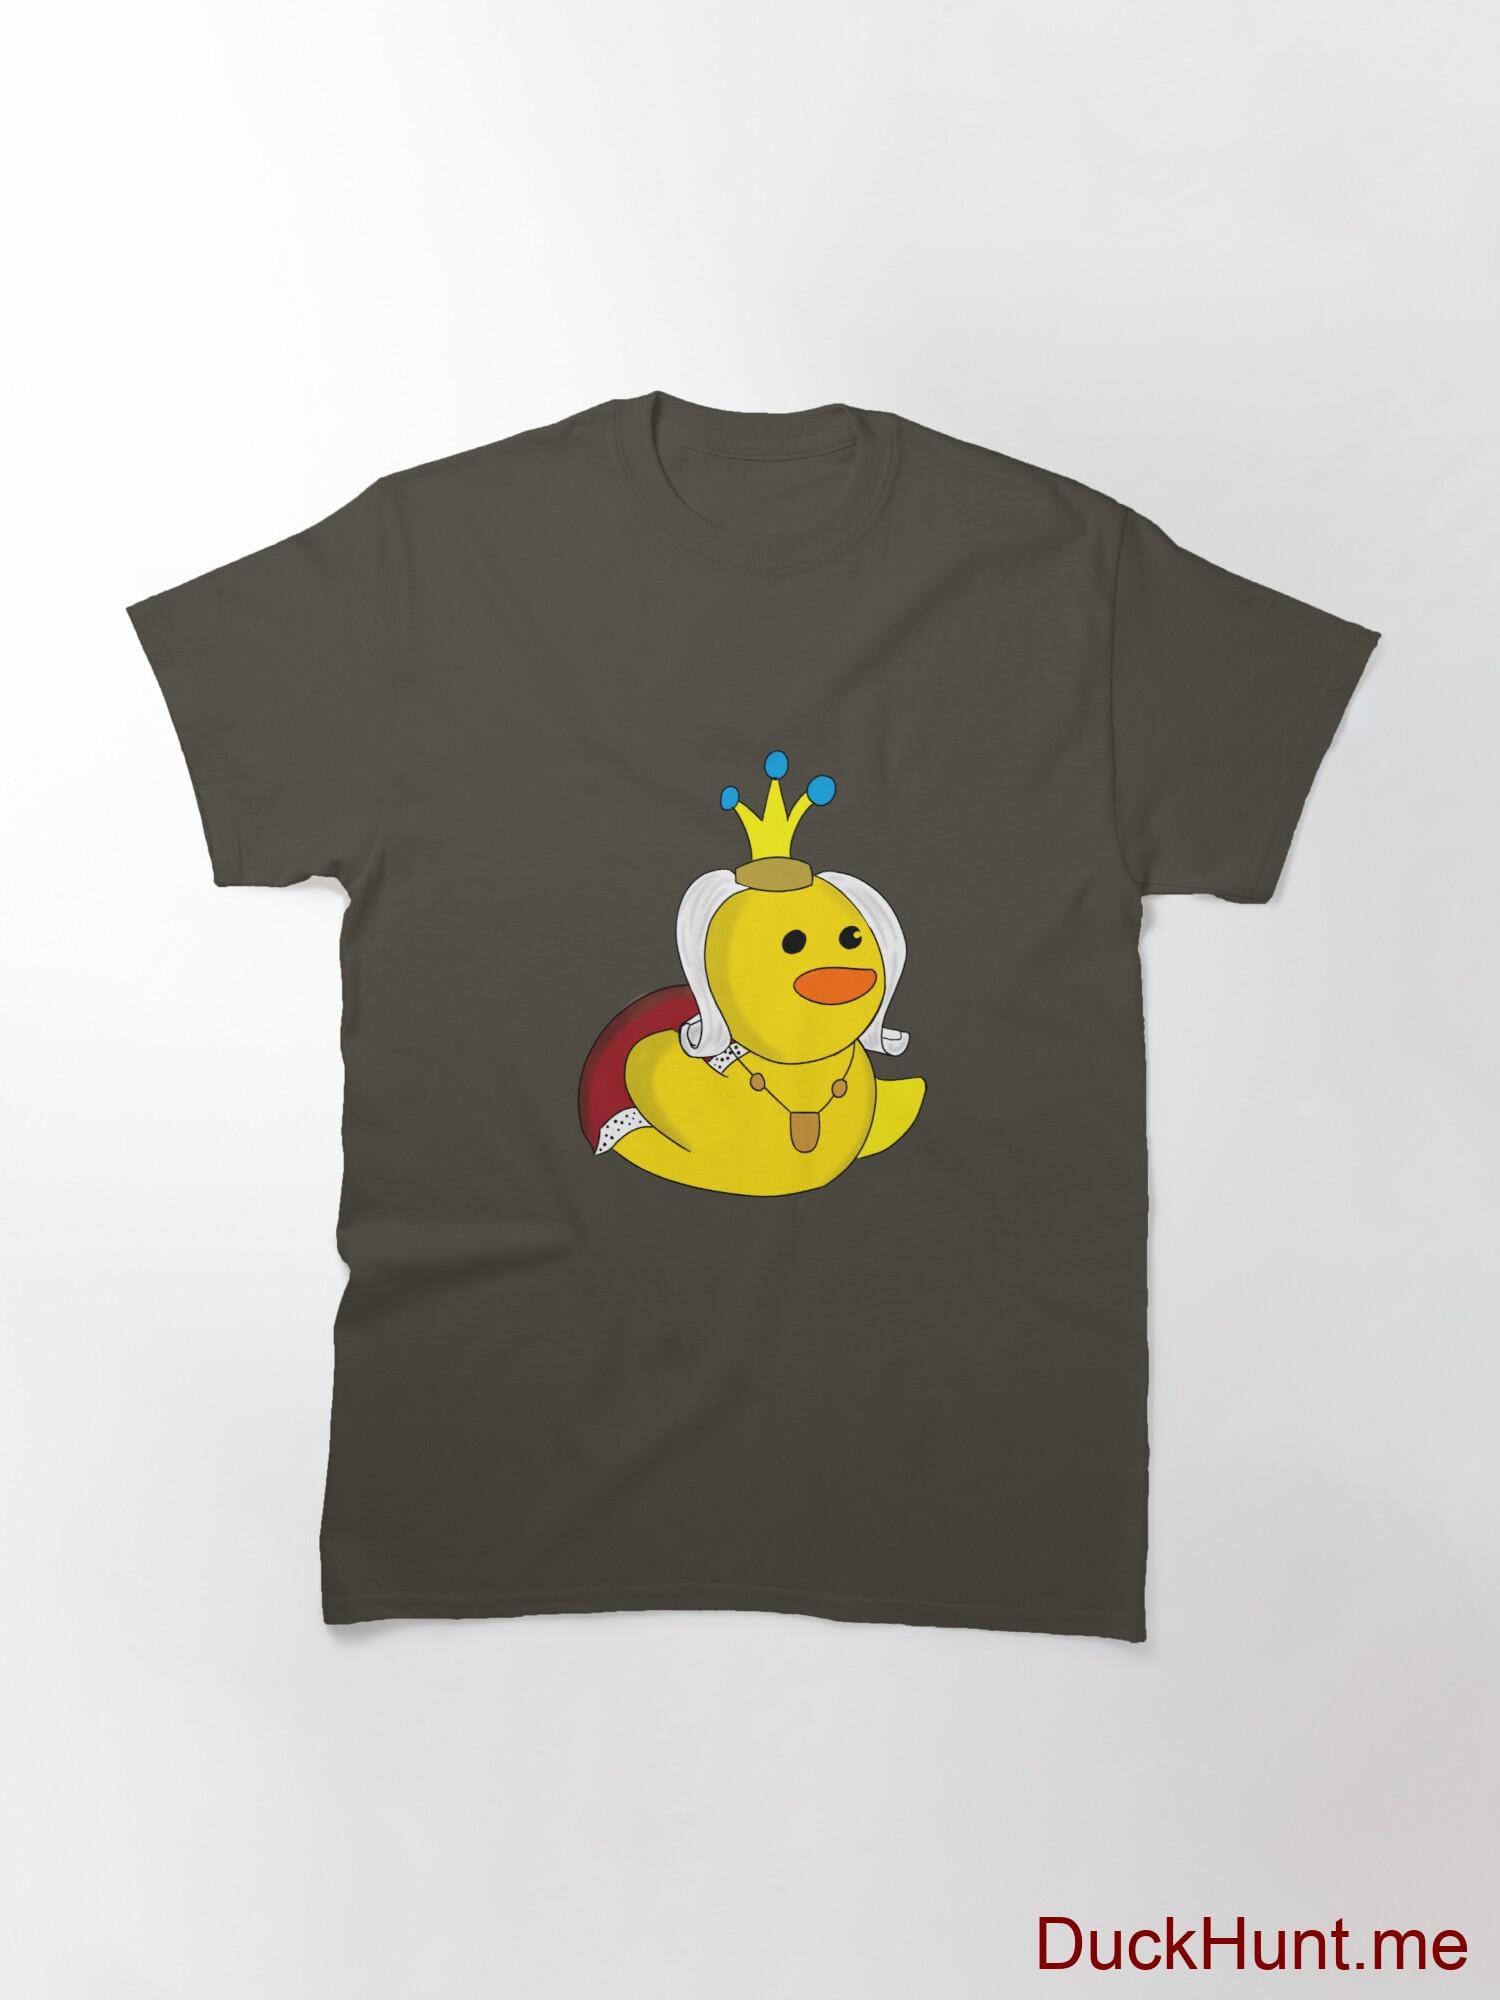 Royal Duck Army Classic T-Shirt (Front printed) alternative image 2